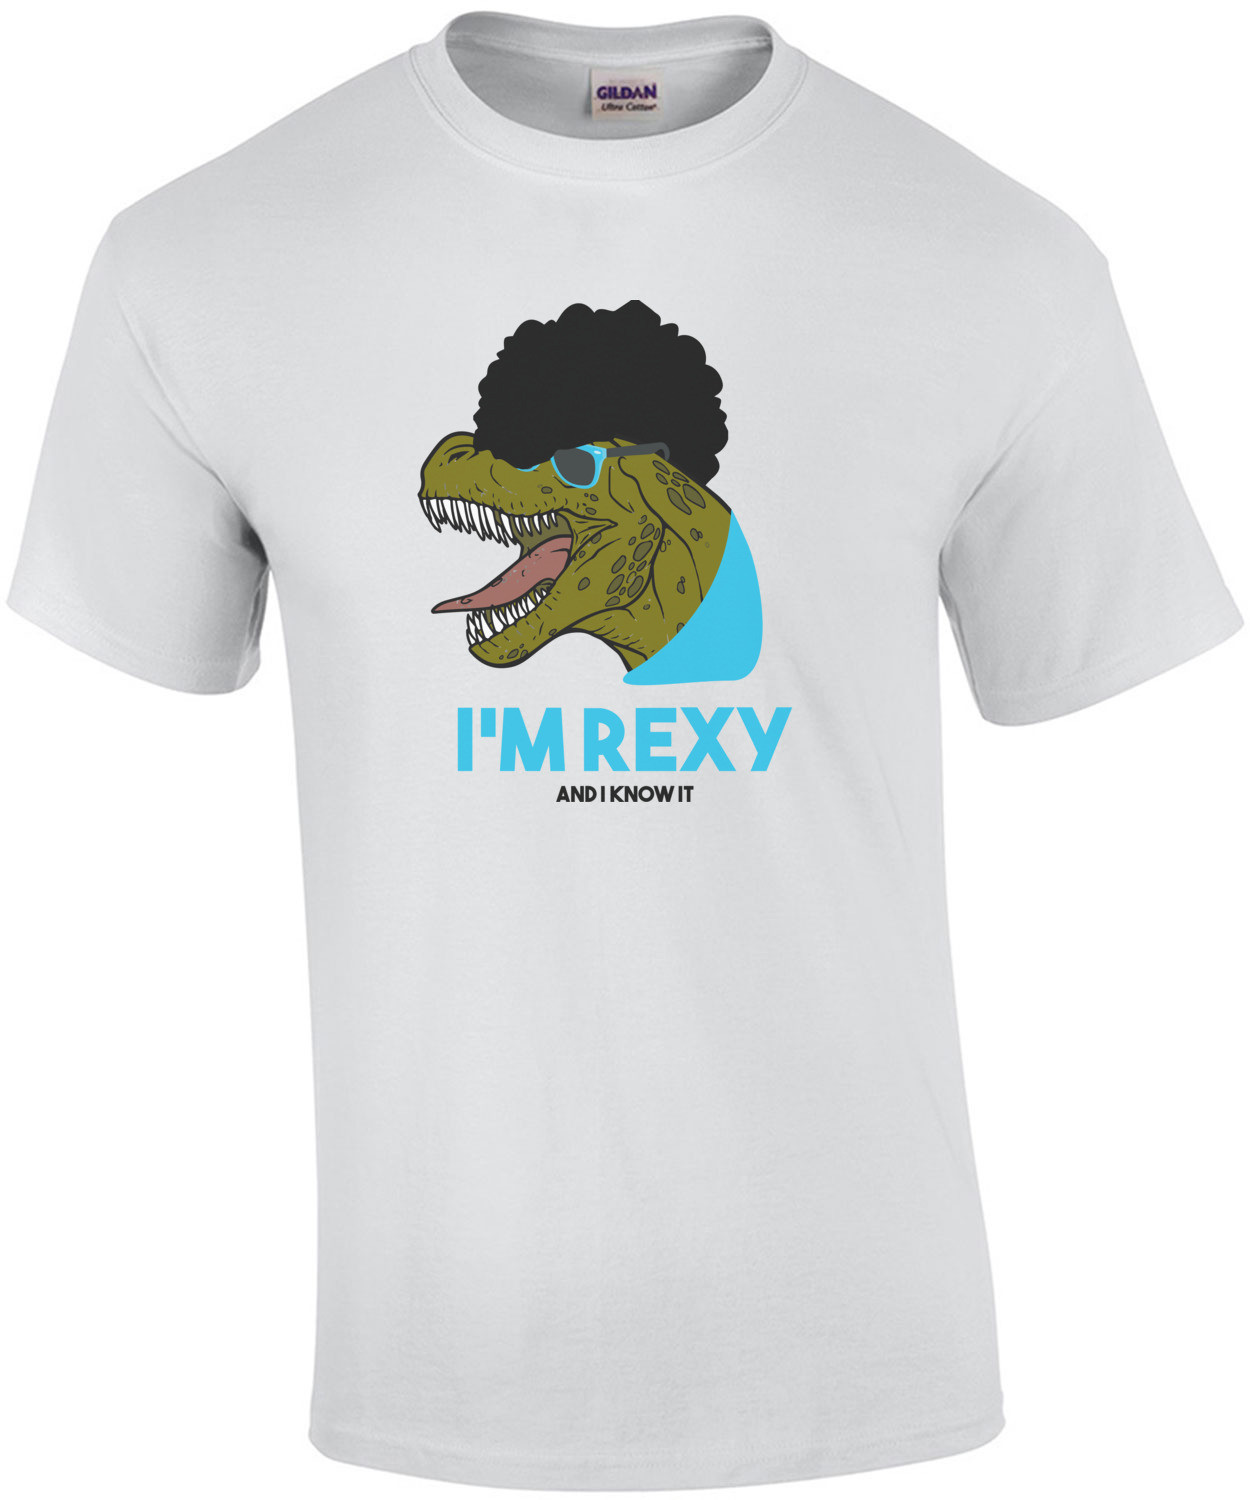 I'm rexy and I know it - T-Rex